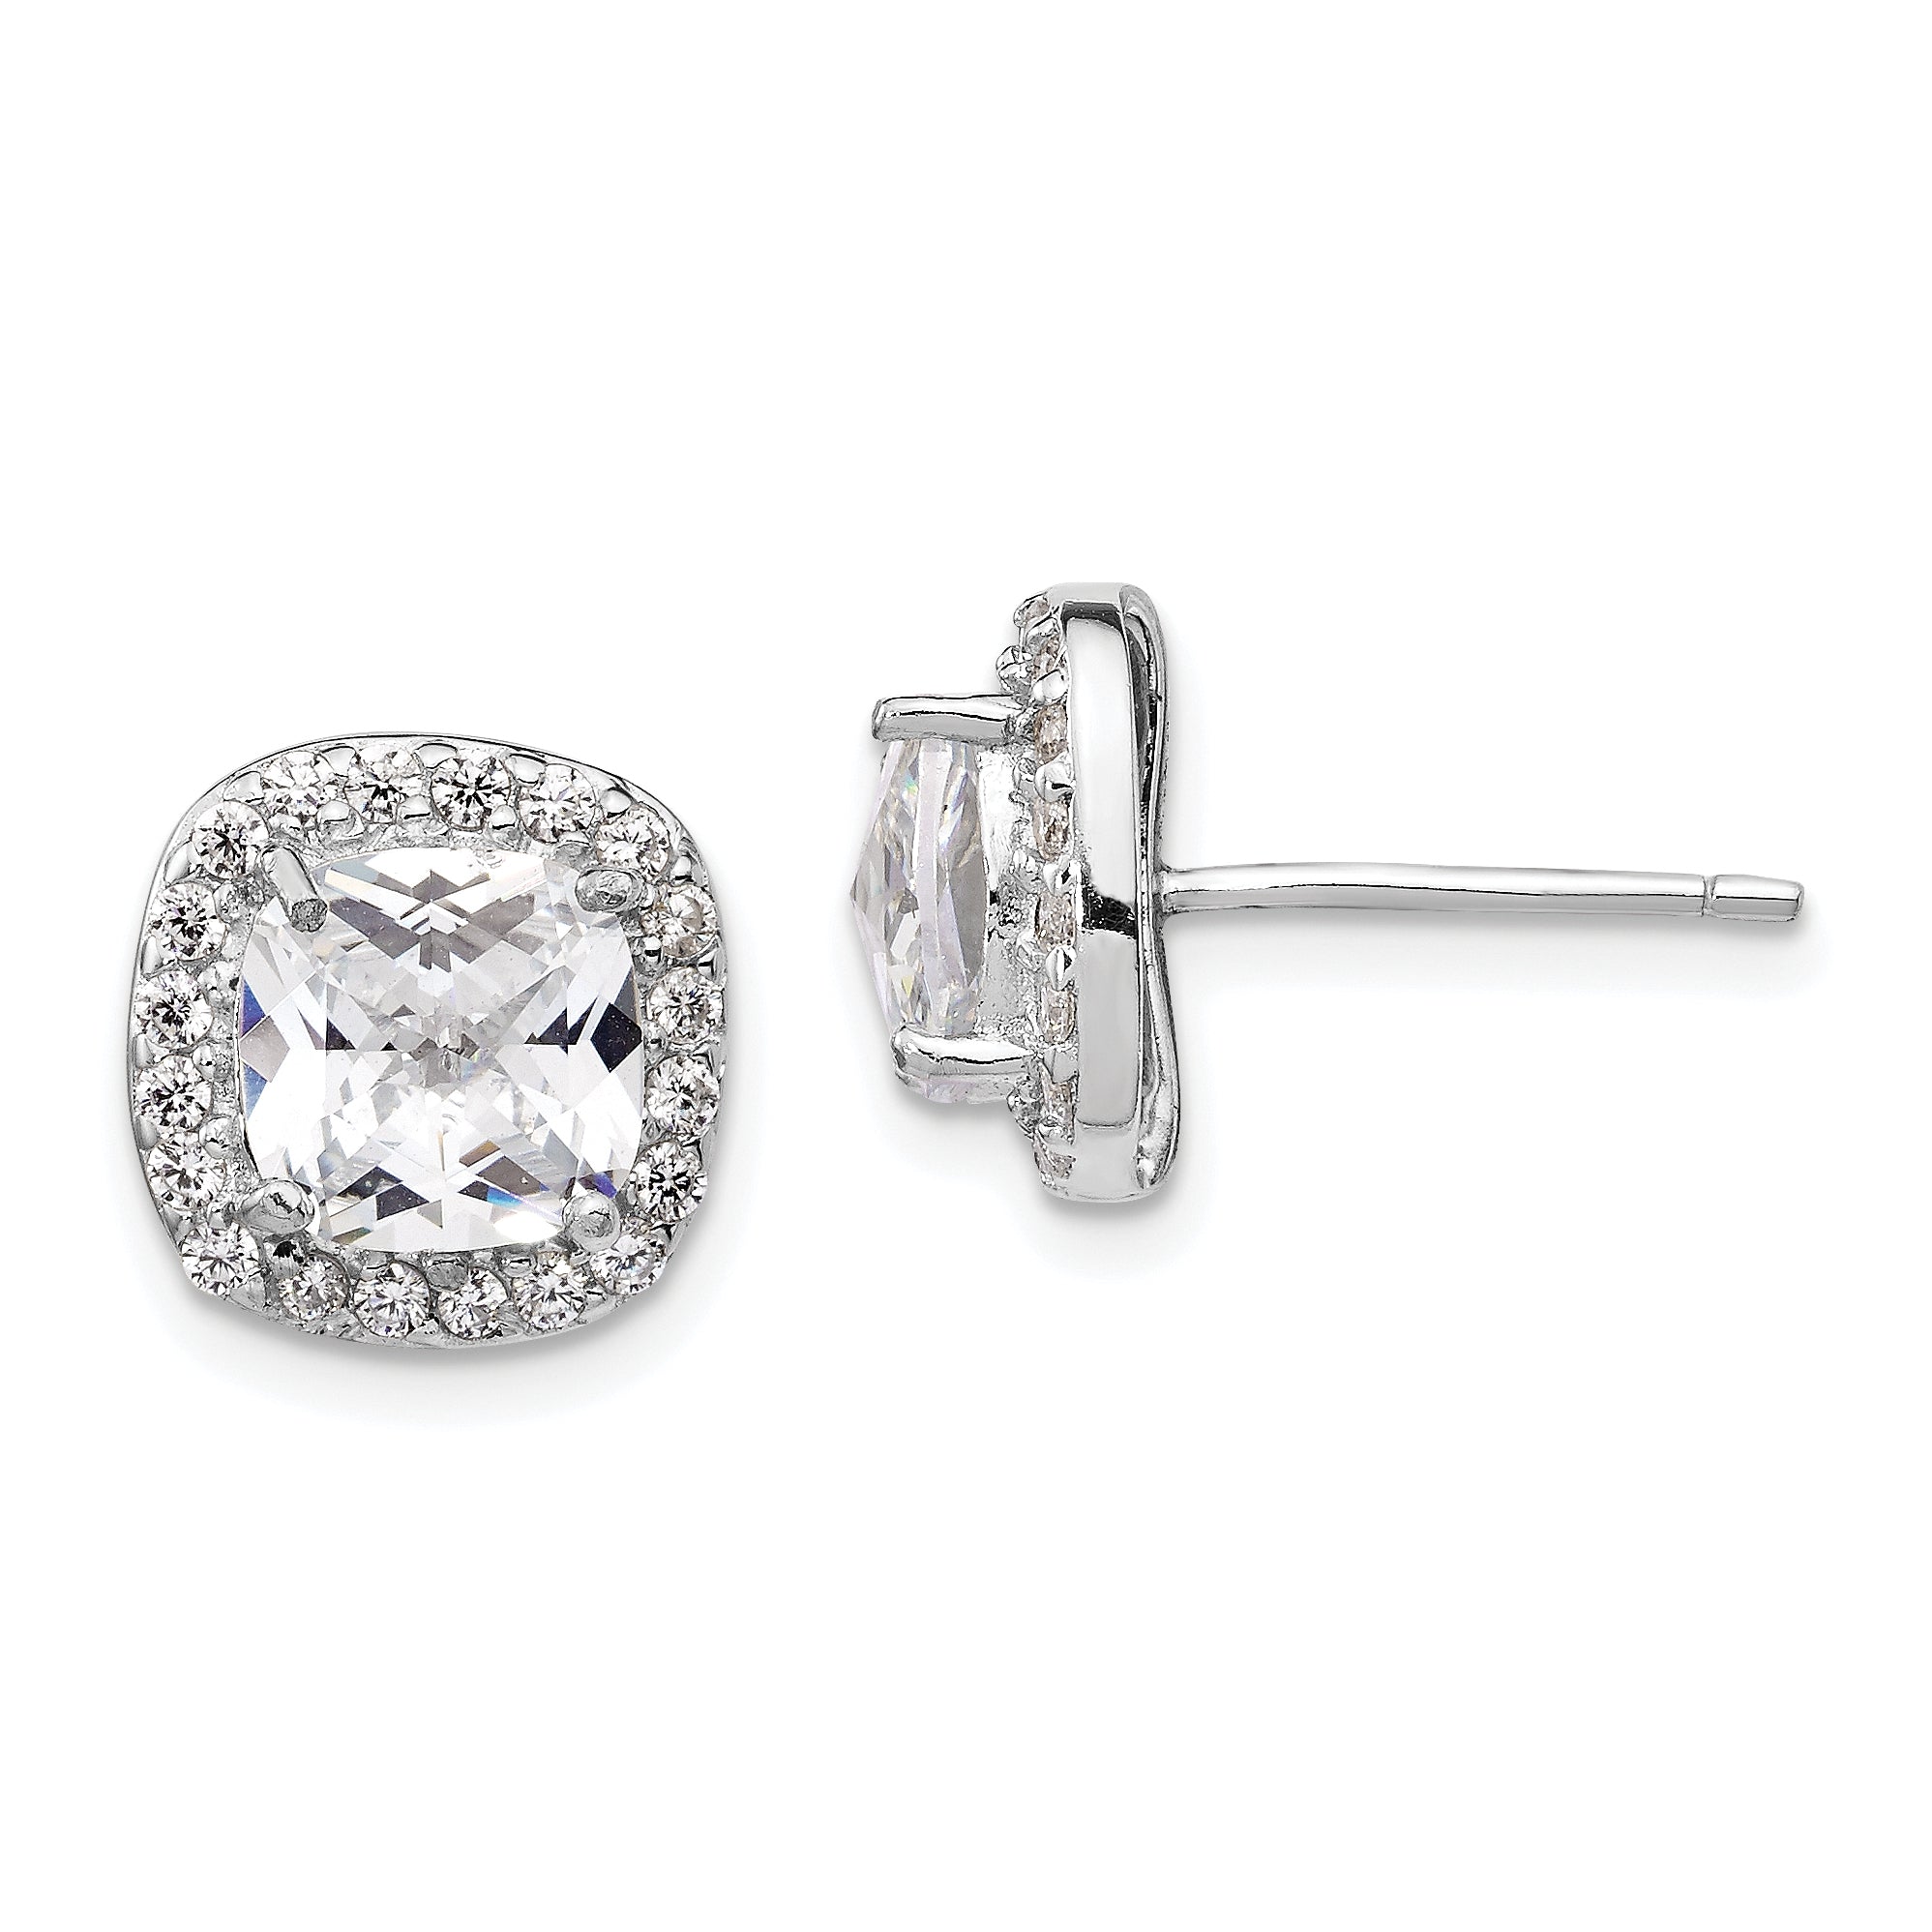 Cheryl M Sterling Silver Rhodium-plated Rose-cut and Brilliant-cut CZ Square Halo Post Earrings